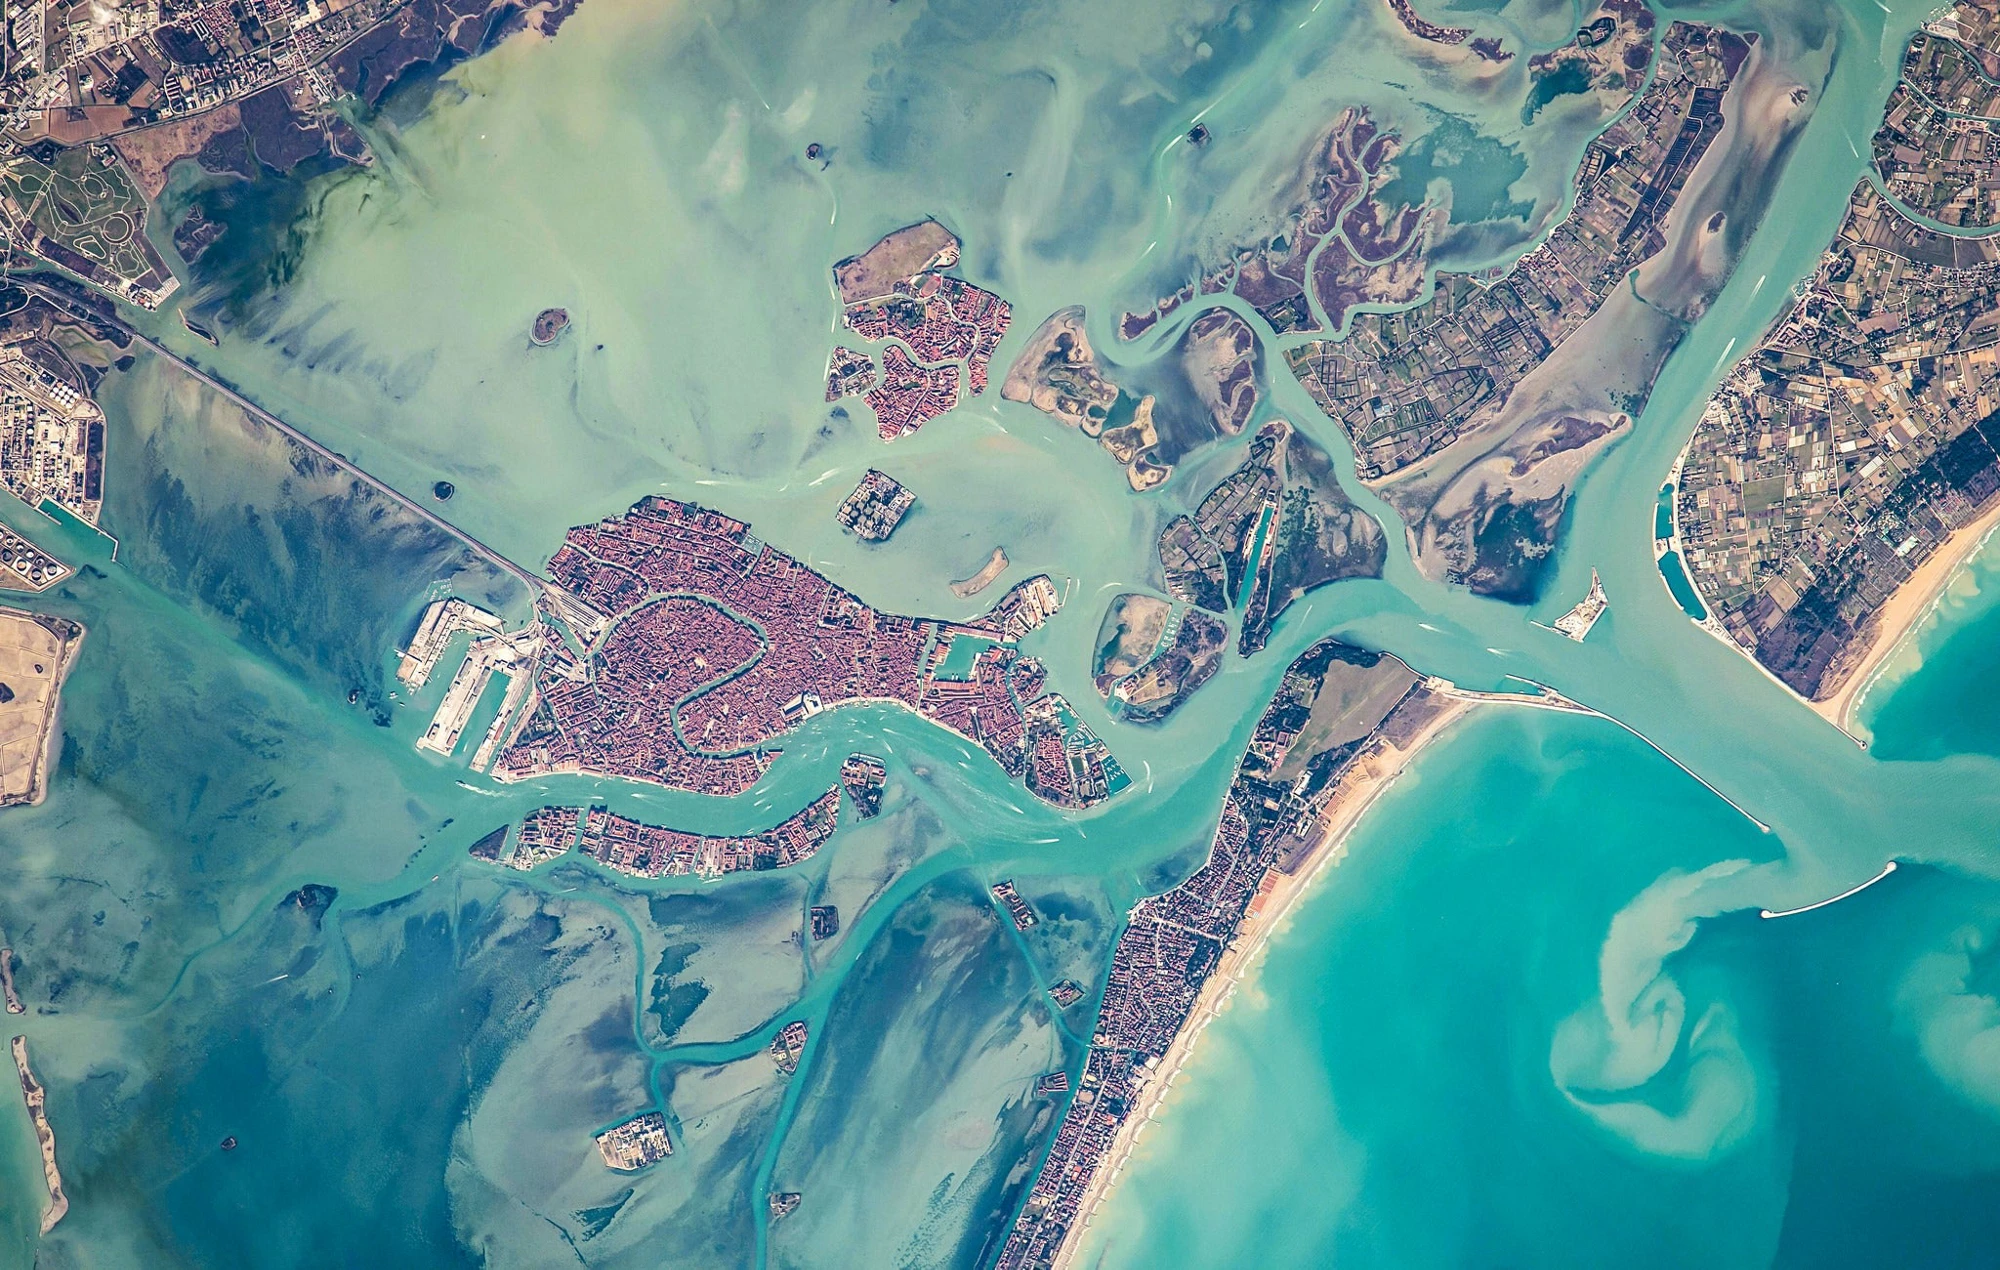 A satellite view of Venice and the surrounding lagoon. Upon completion of the MOSE project in 2018, a series of flood gates between the lagoon and the Adriatic Sea will protect the city from high tide and storm surges.